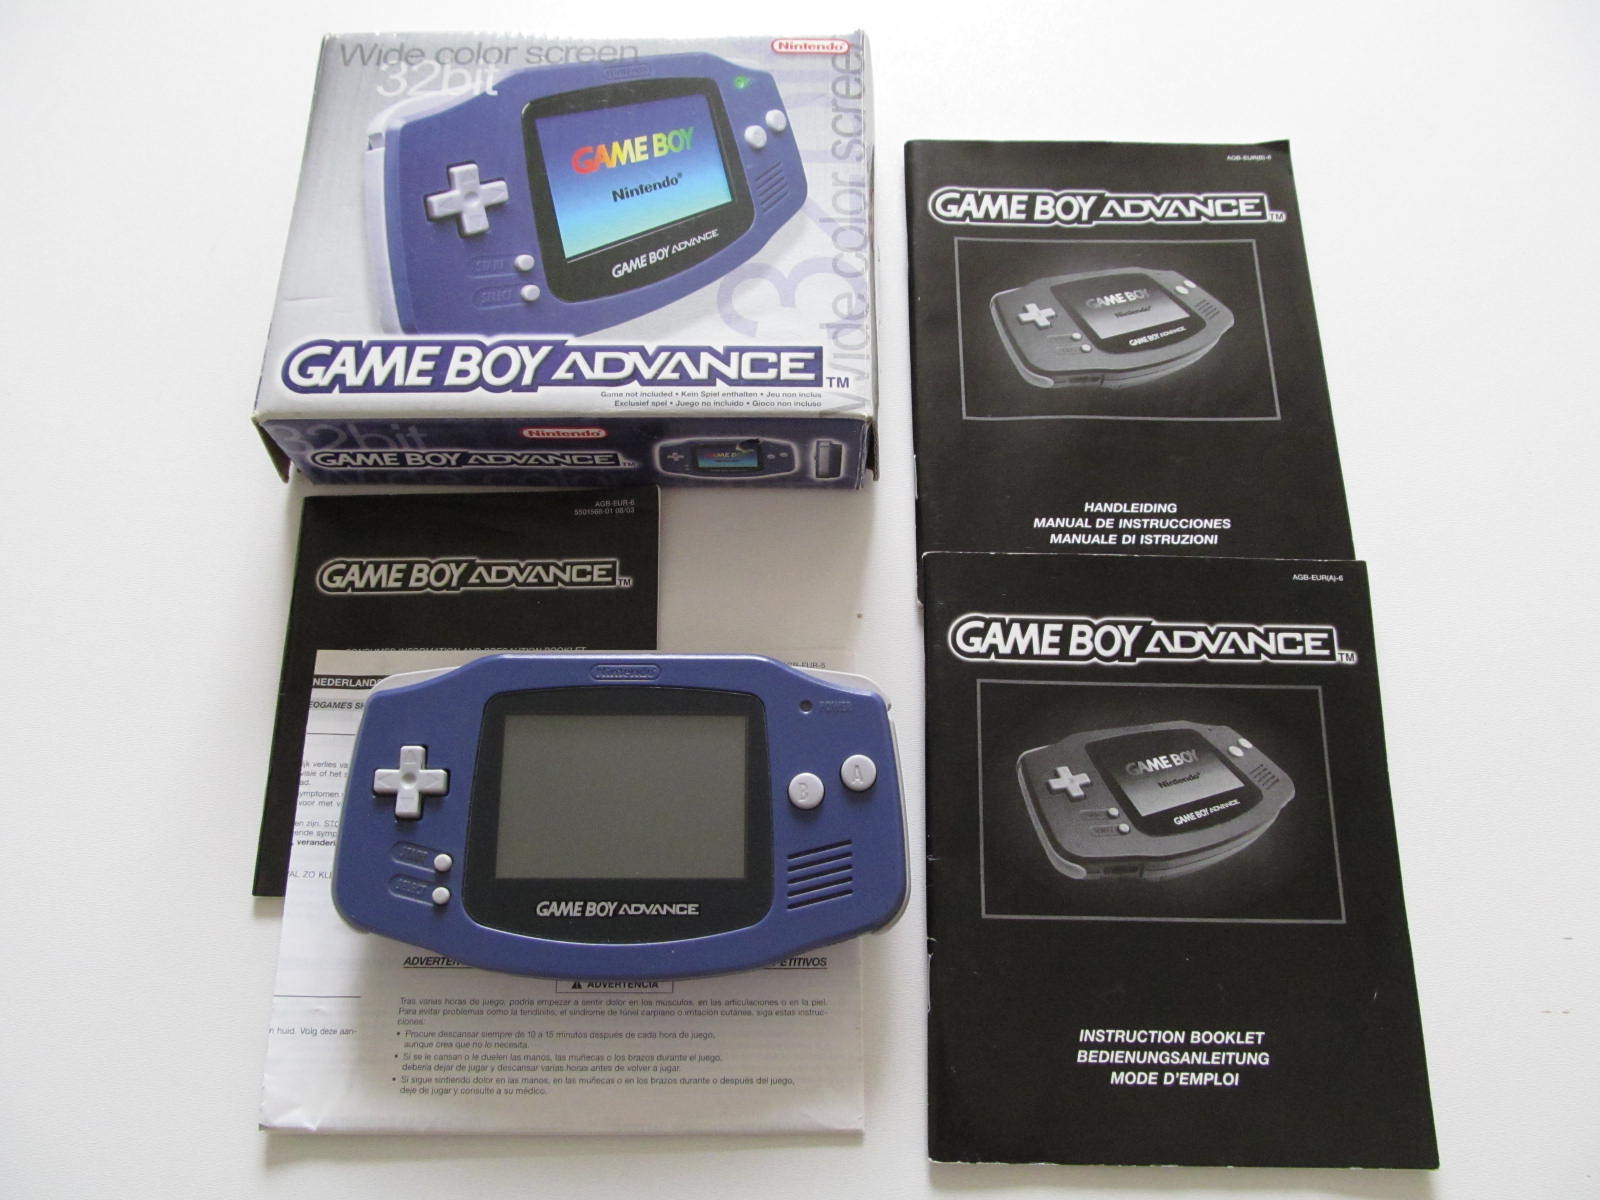 Gameboy Advance Console Boxed - Purple